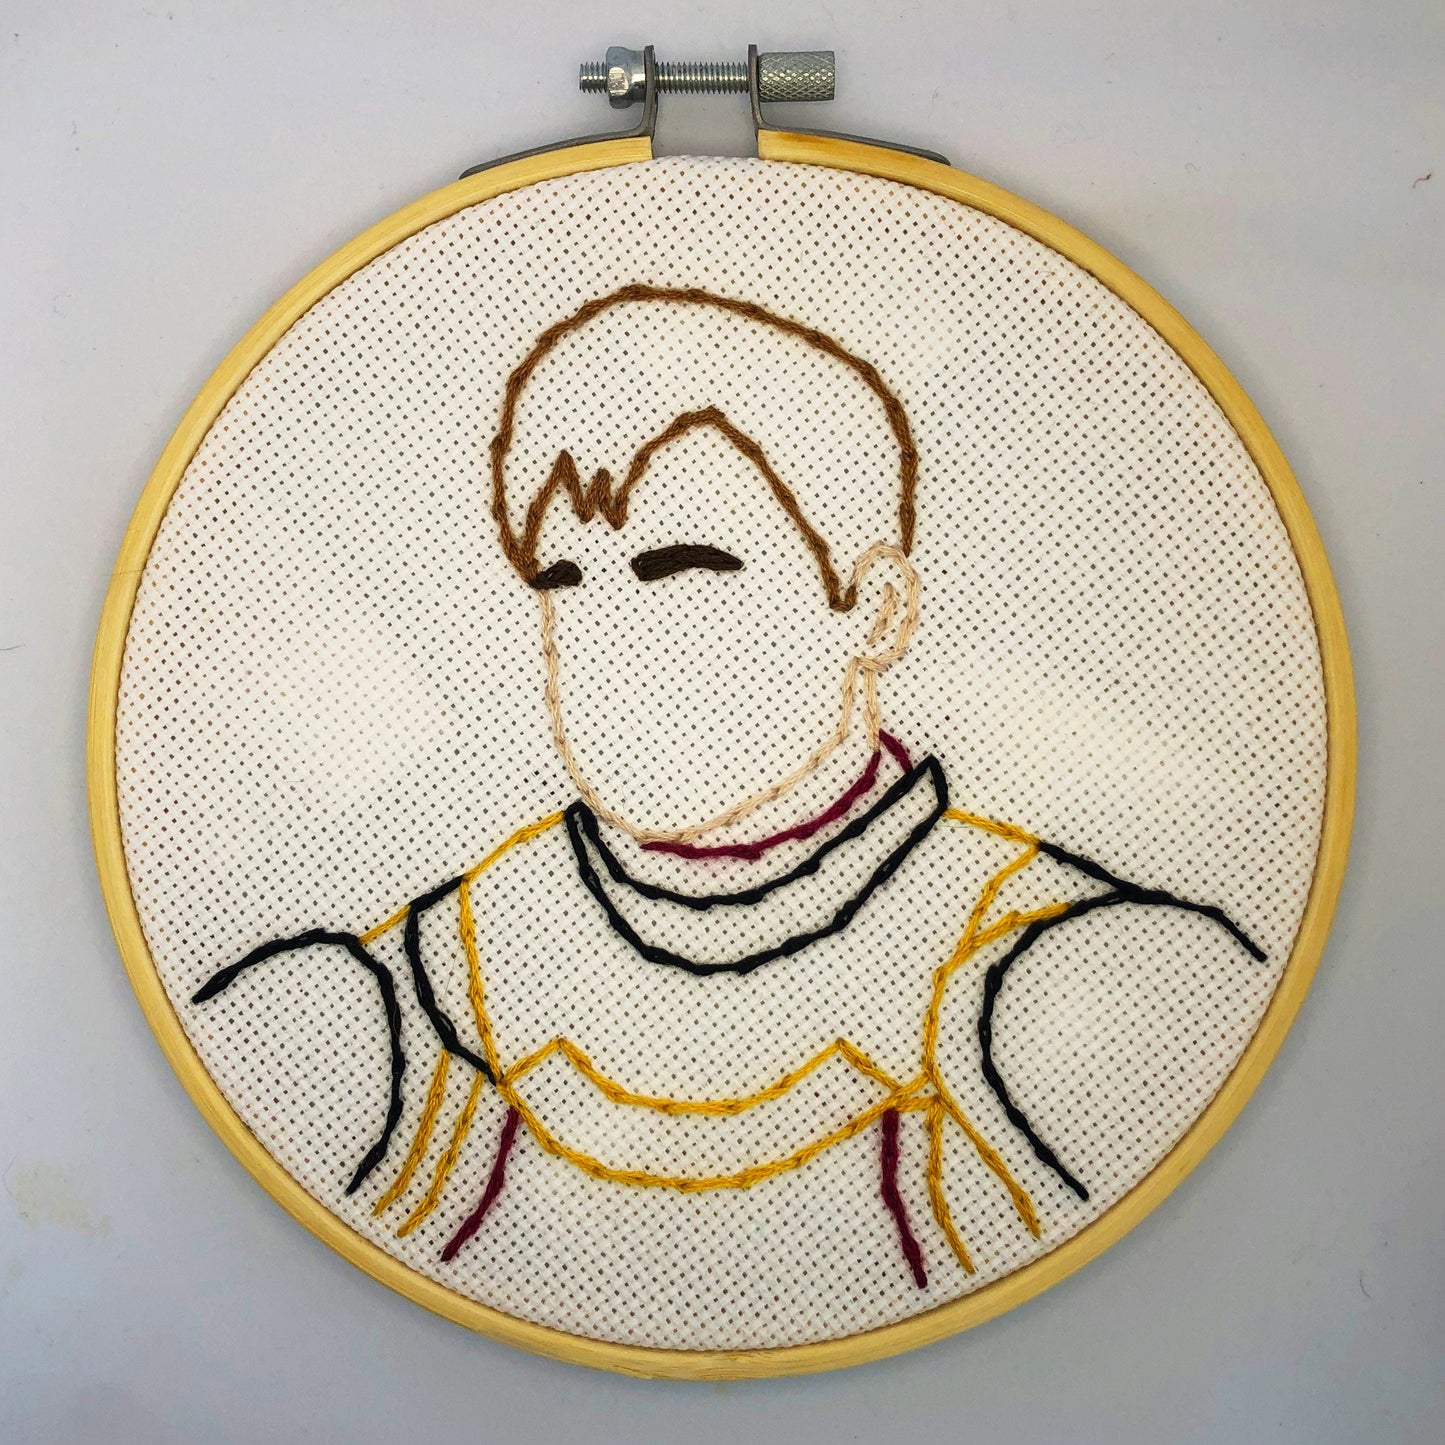 Game of Thrones embroidery